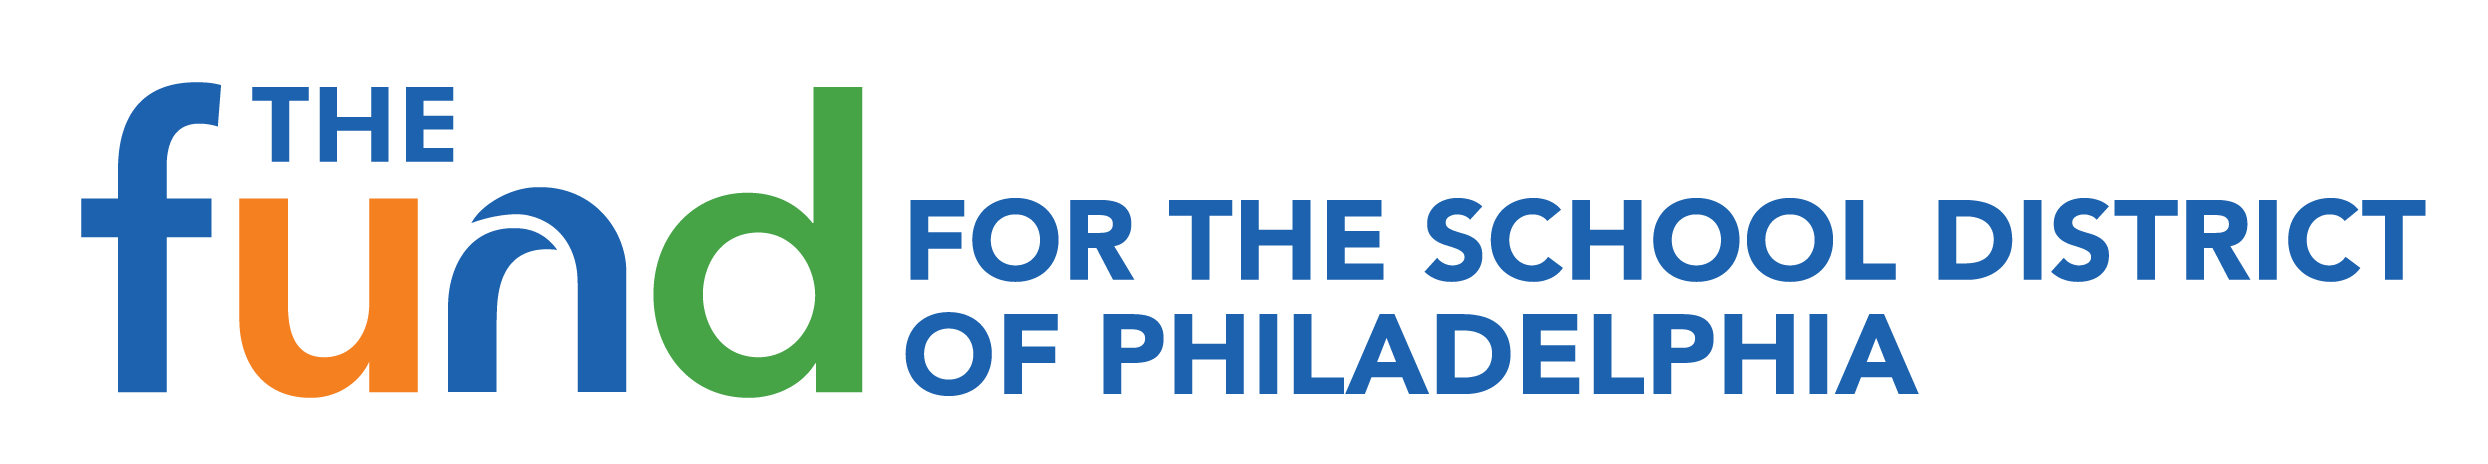 The Fund for the School District of Philadelphia